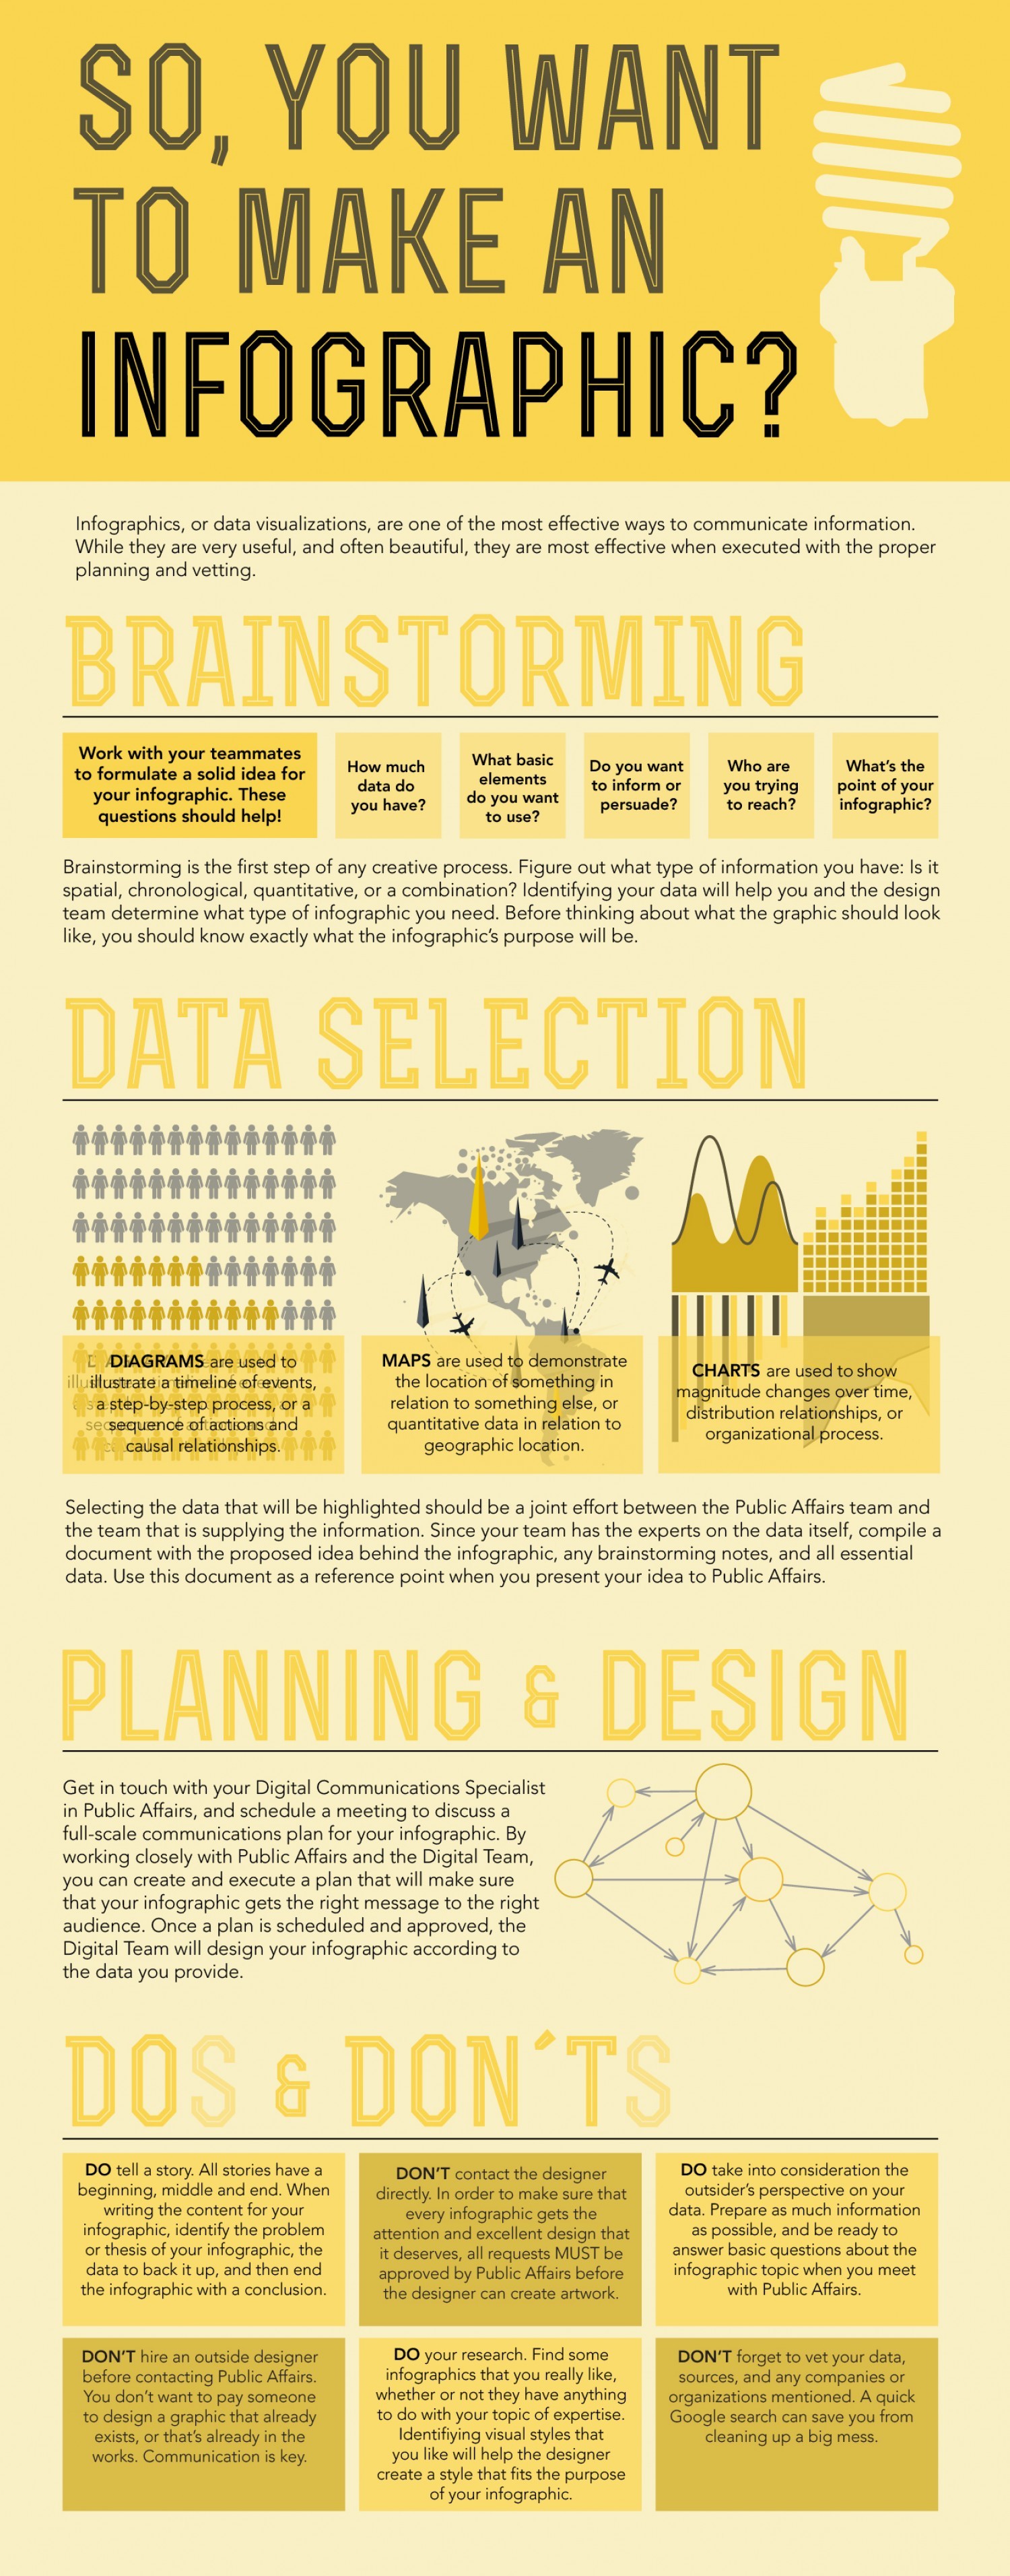 so-you-want-to-make-an-infographic_51341b7b1b42f_w1500-1